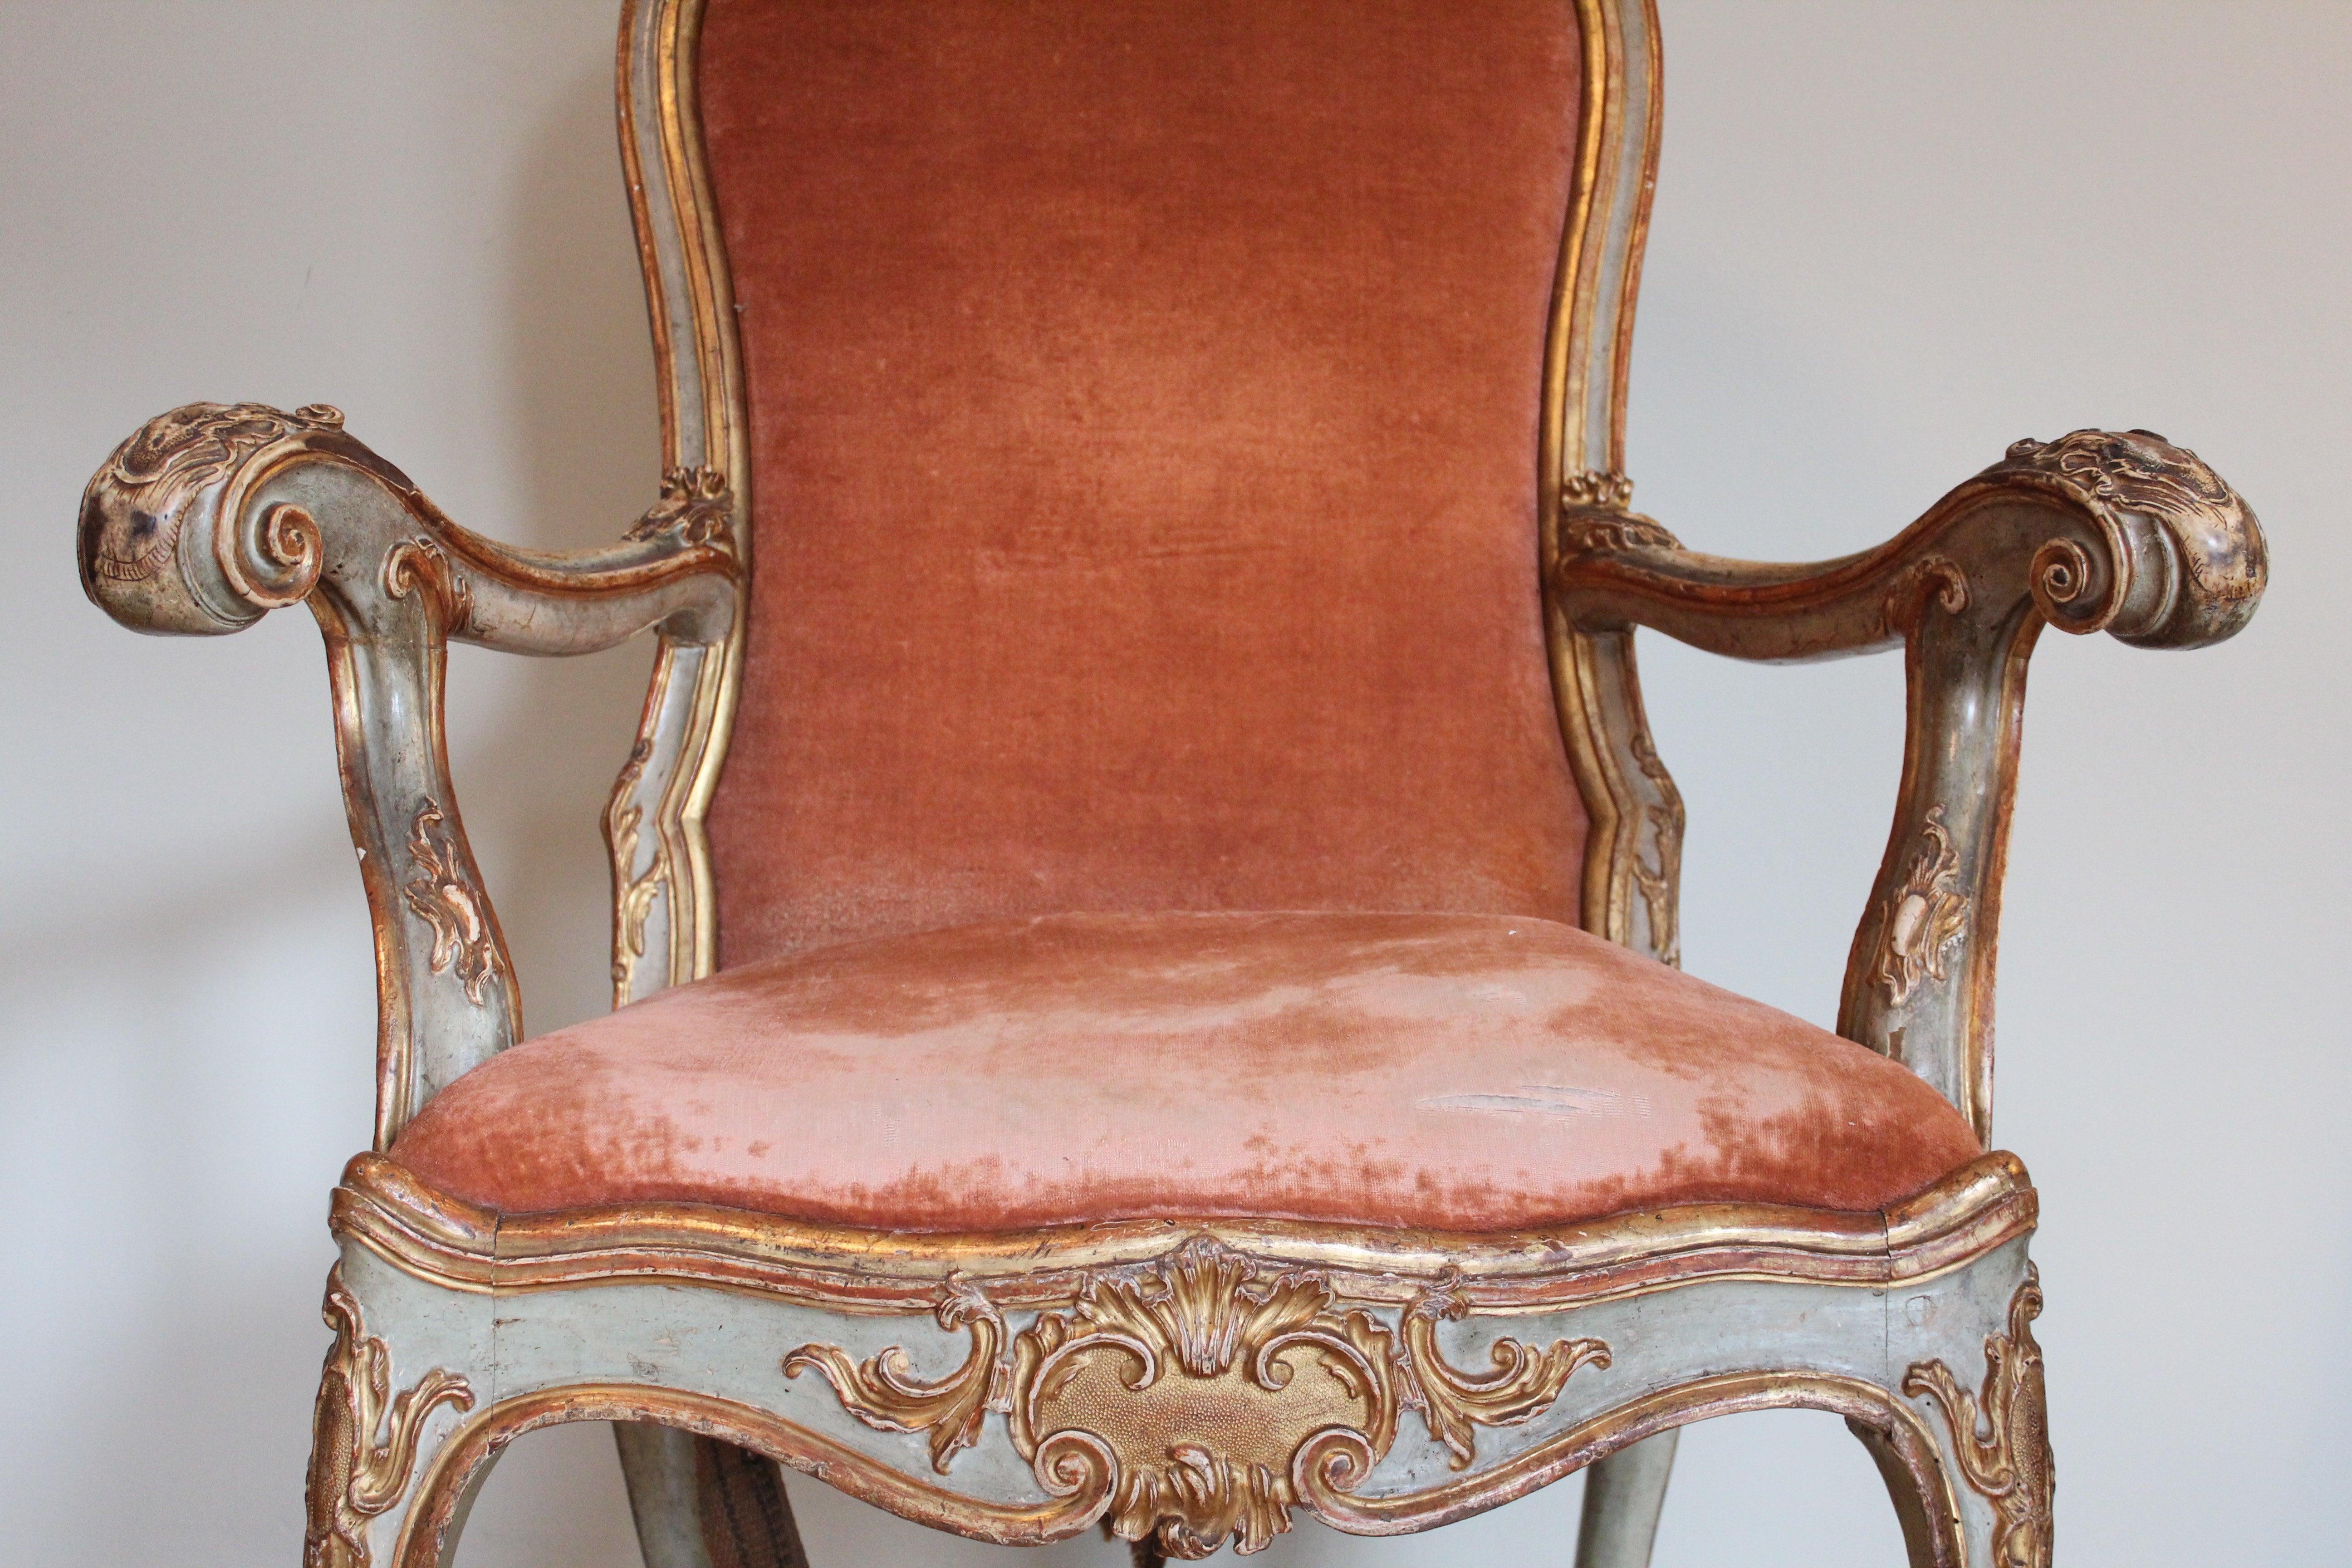 Unique Venetian doge chair. Very large and impressive and monumental piece from an aristocratic provenance. The chair is made of wood, painted with original gold ornaments and rich carvings. Very large backrest, King size and similar to a coronation